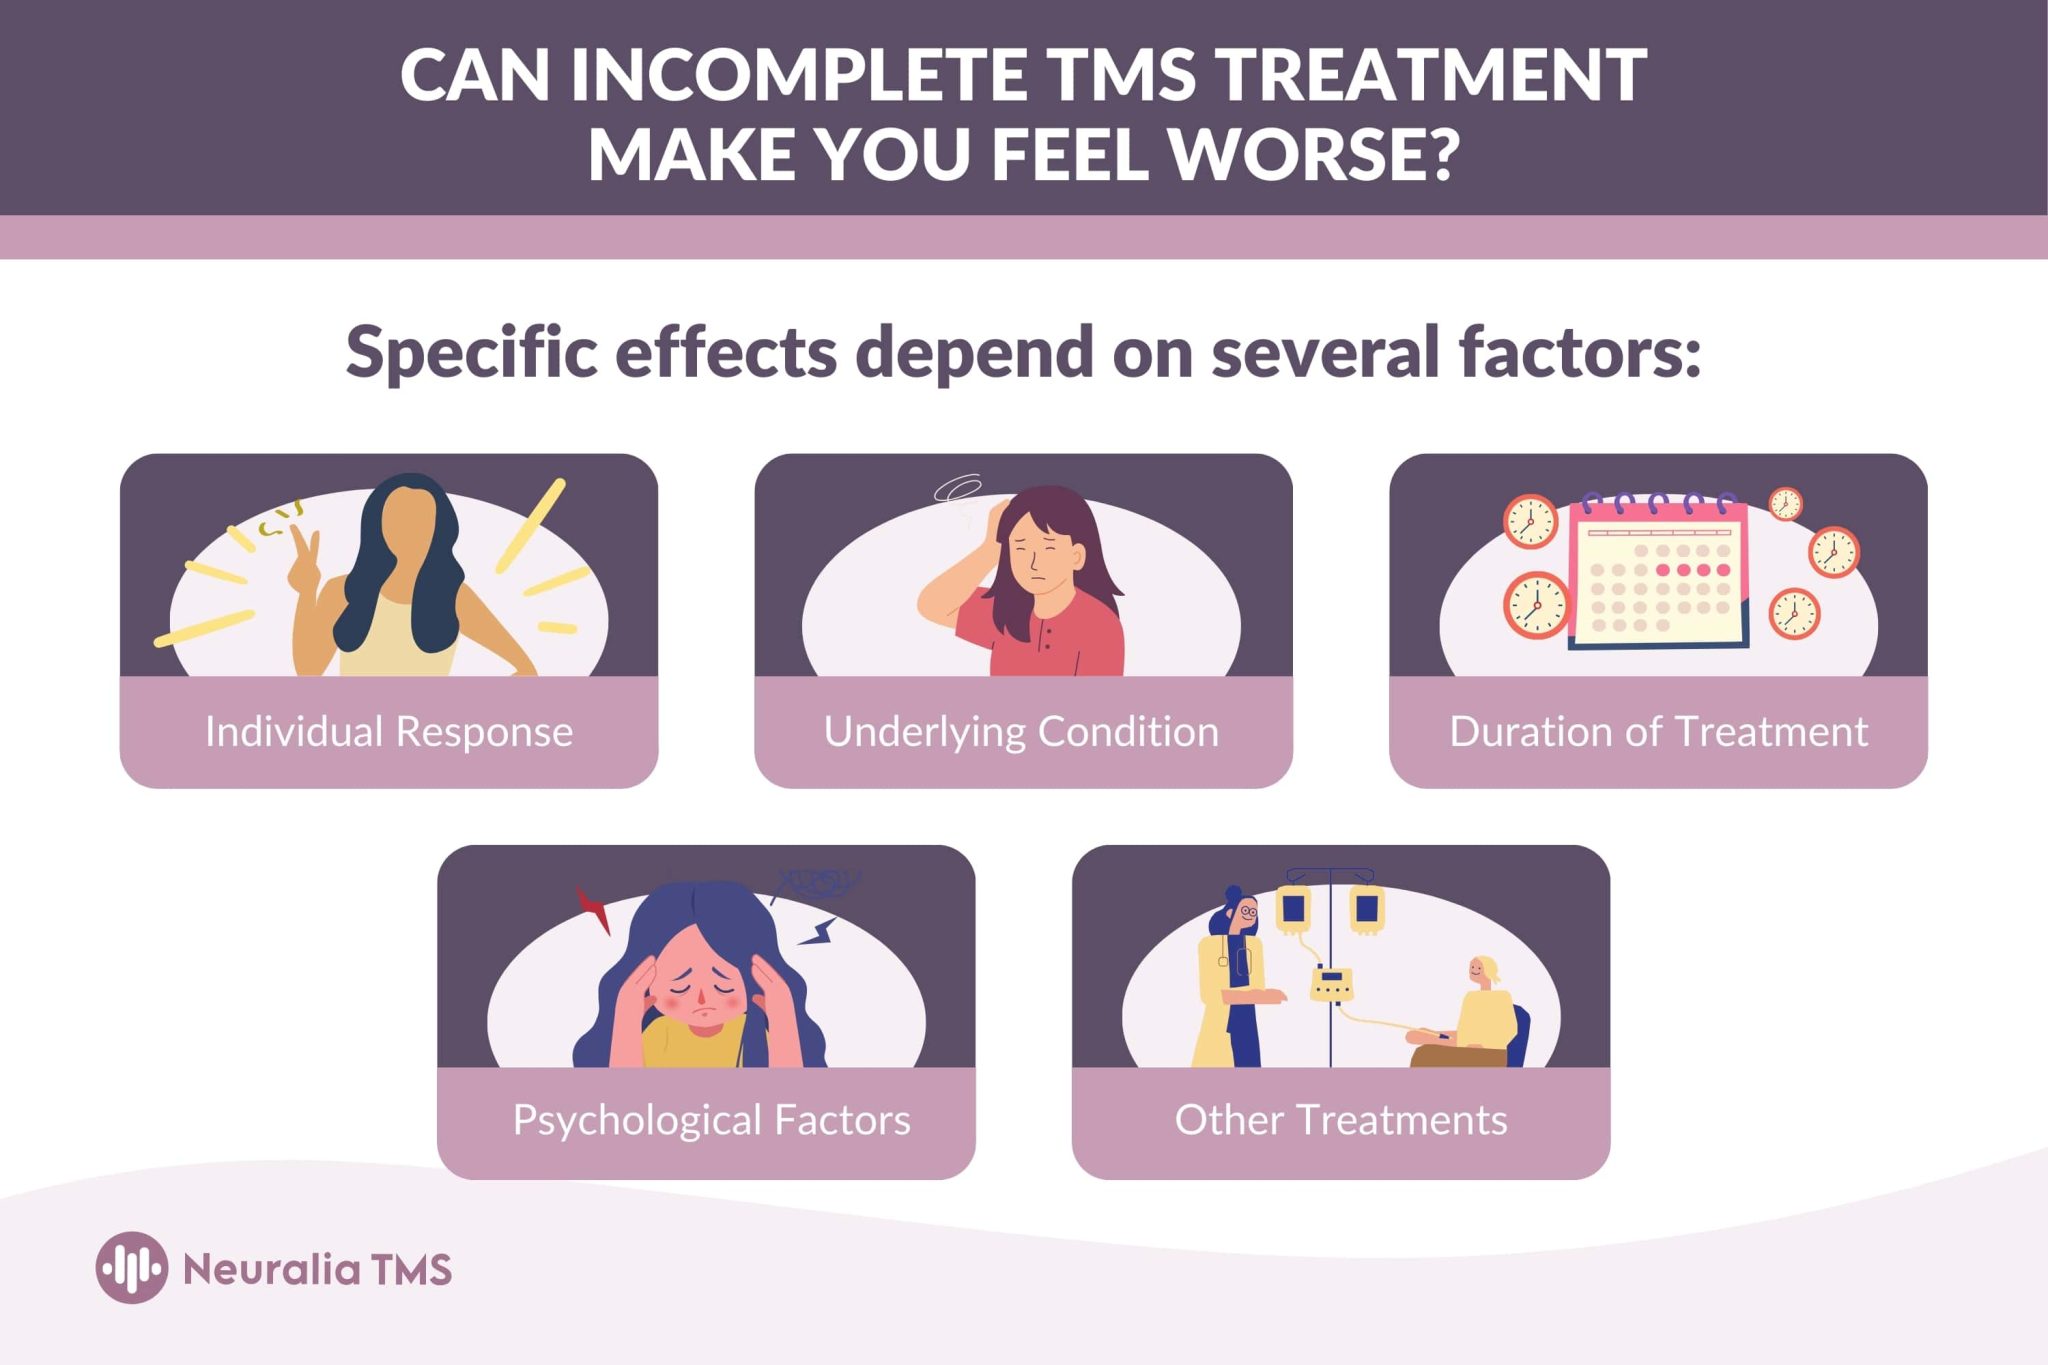 Can Incomplete TMS Treatment Make You Feel Worse